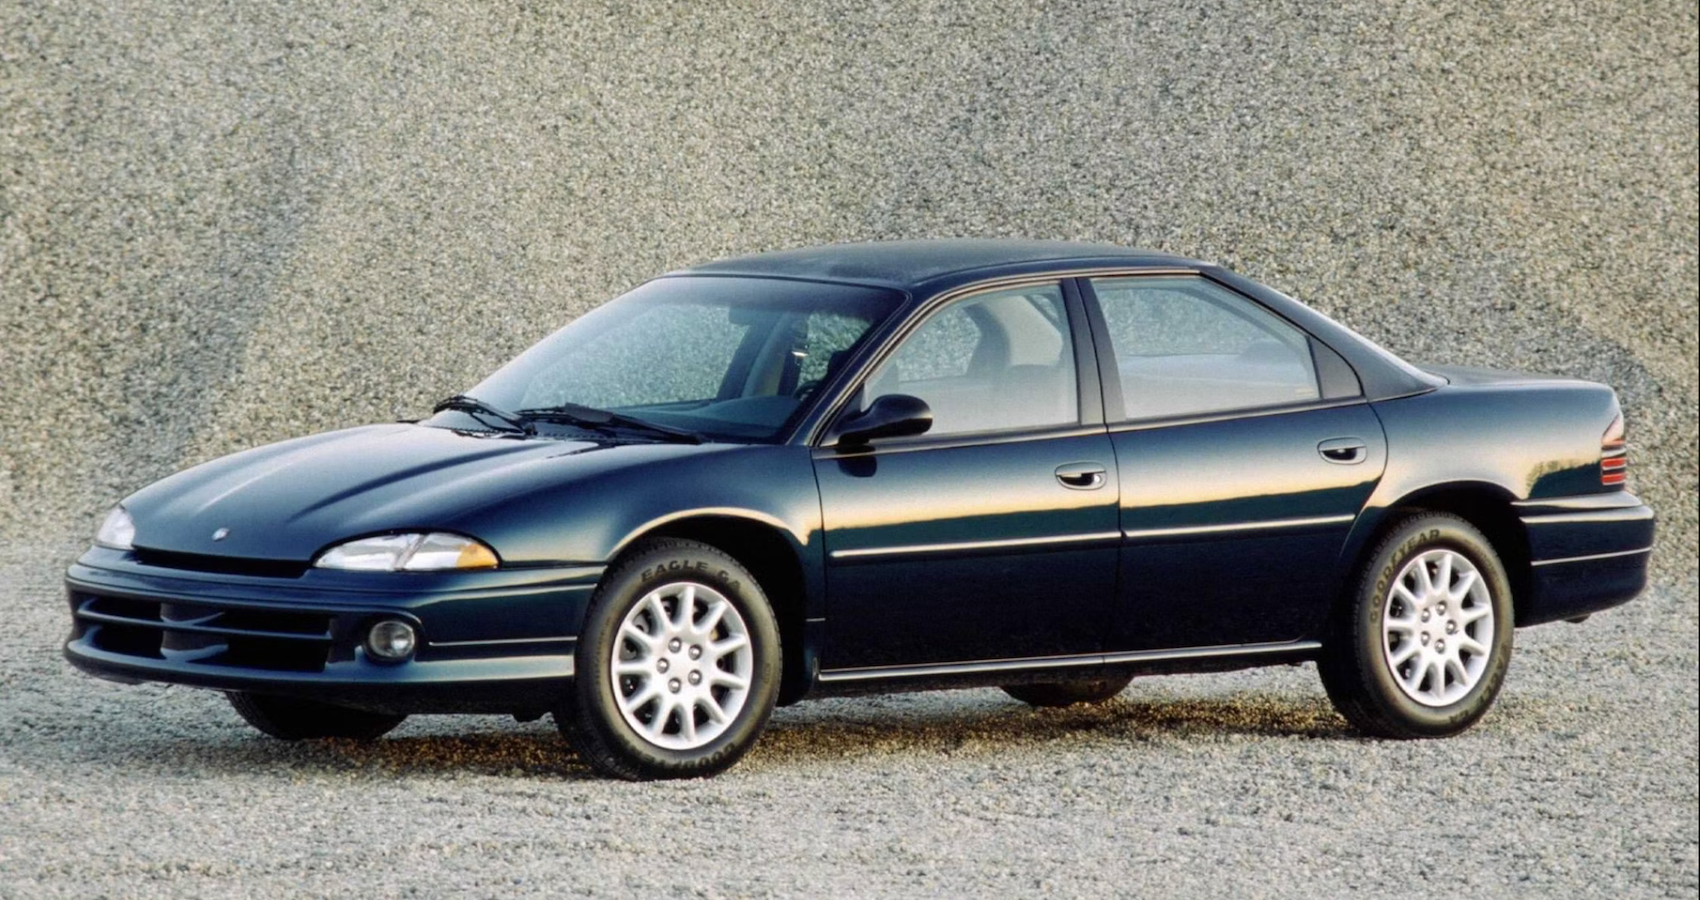 Here's Why The Dodge Intrepid Was Discontinued